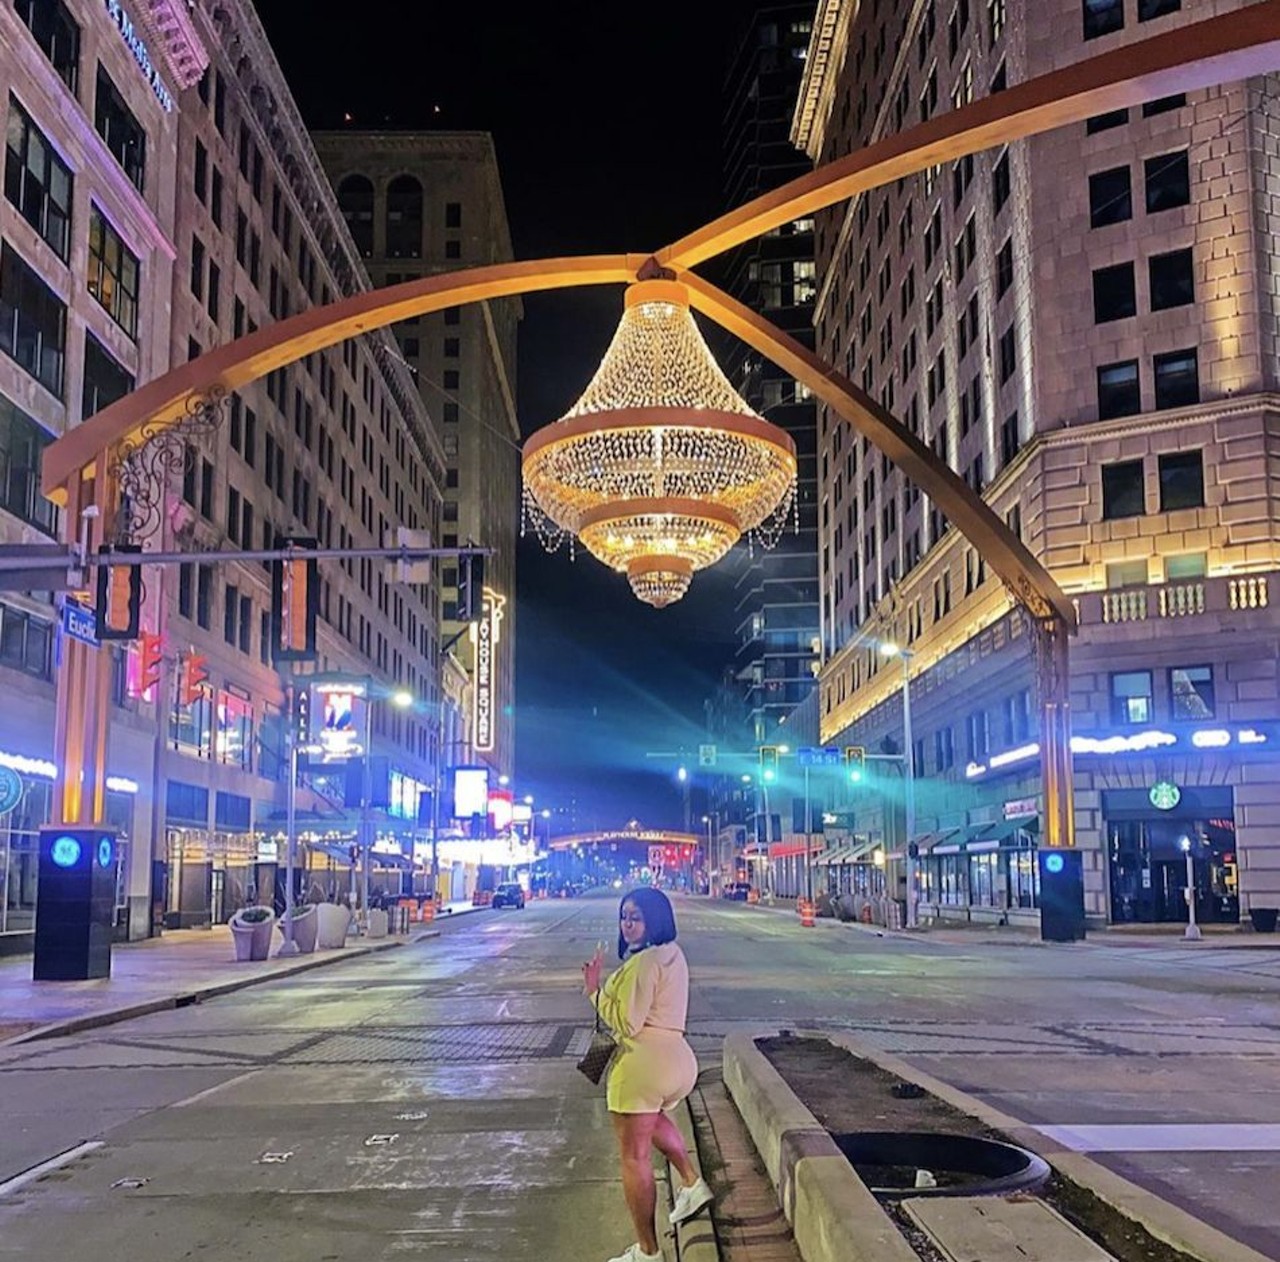  Playhouse Square Chandelier
1501 Euclid Ave., Cleveland  
It wasn&#146;t enough that we have one of the best theater districts in the country. We of course also needed a giant chandelier in the middle of the street. Well, at least it photographs well.
Photo via @annabella05/Instagram